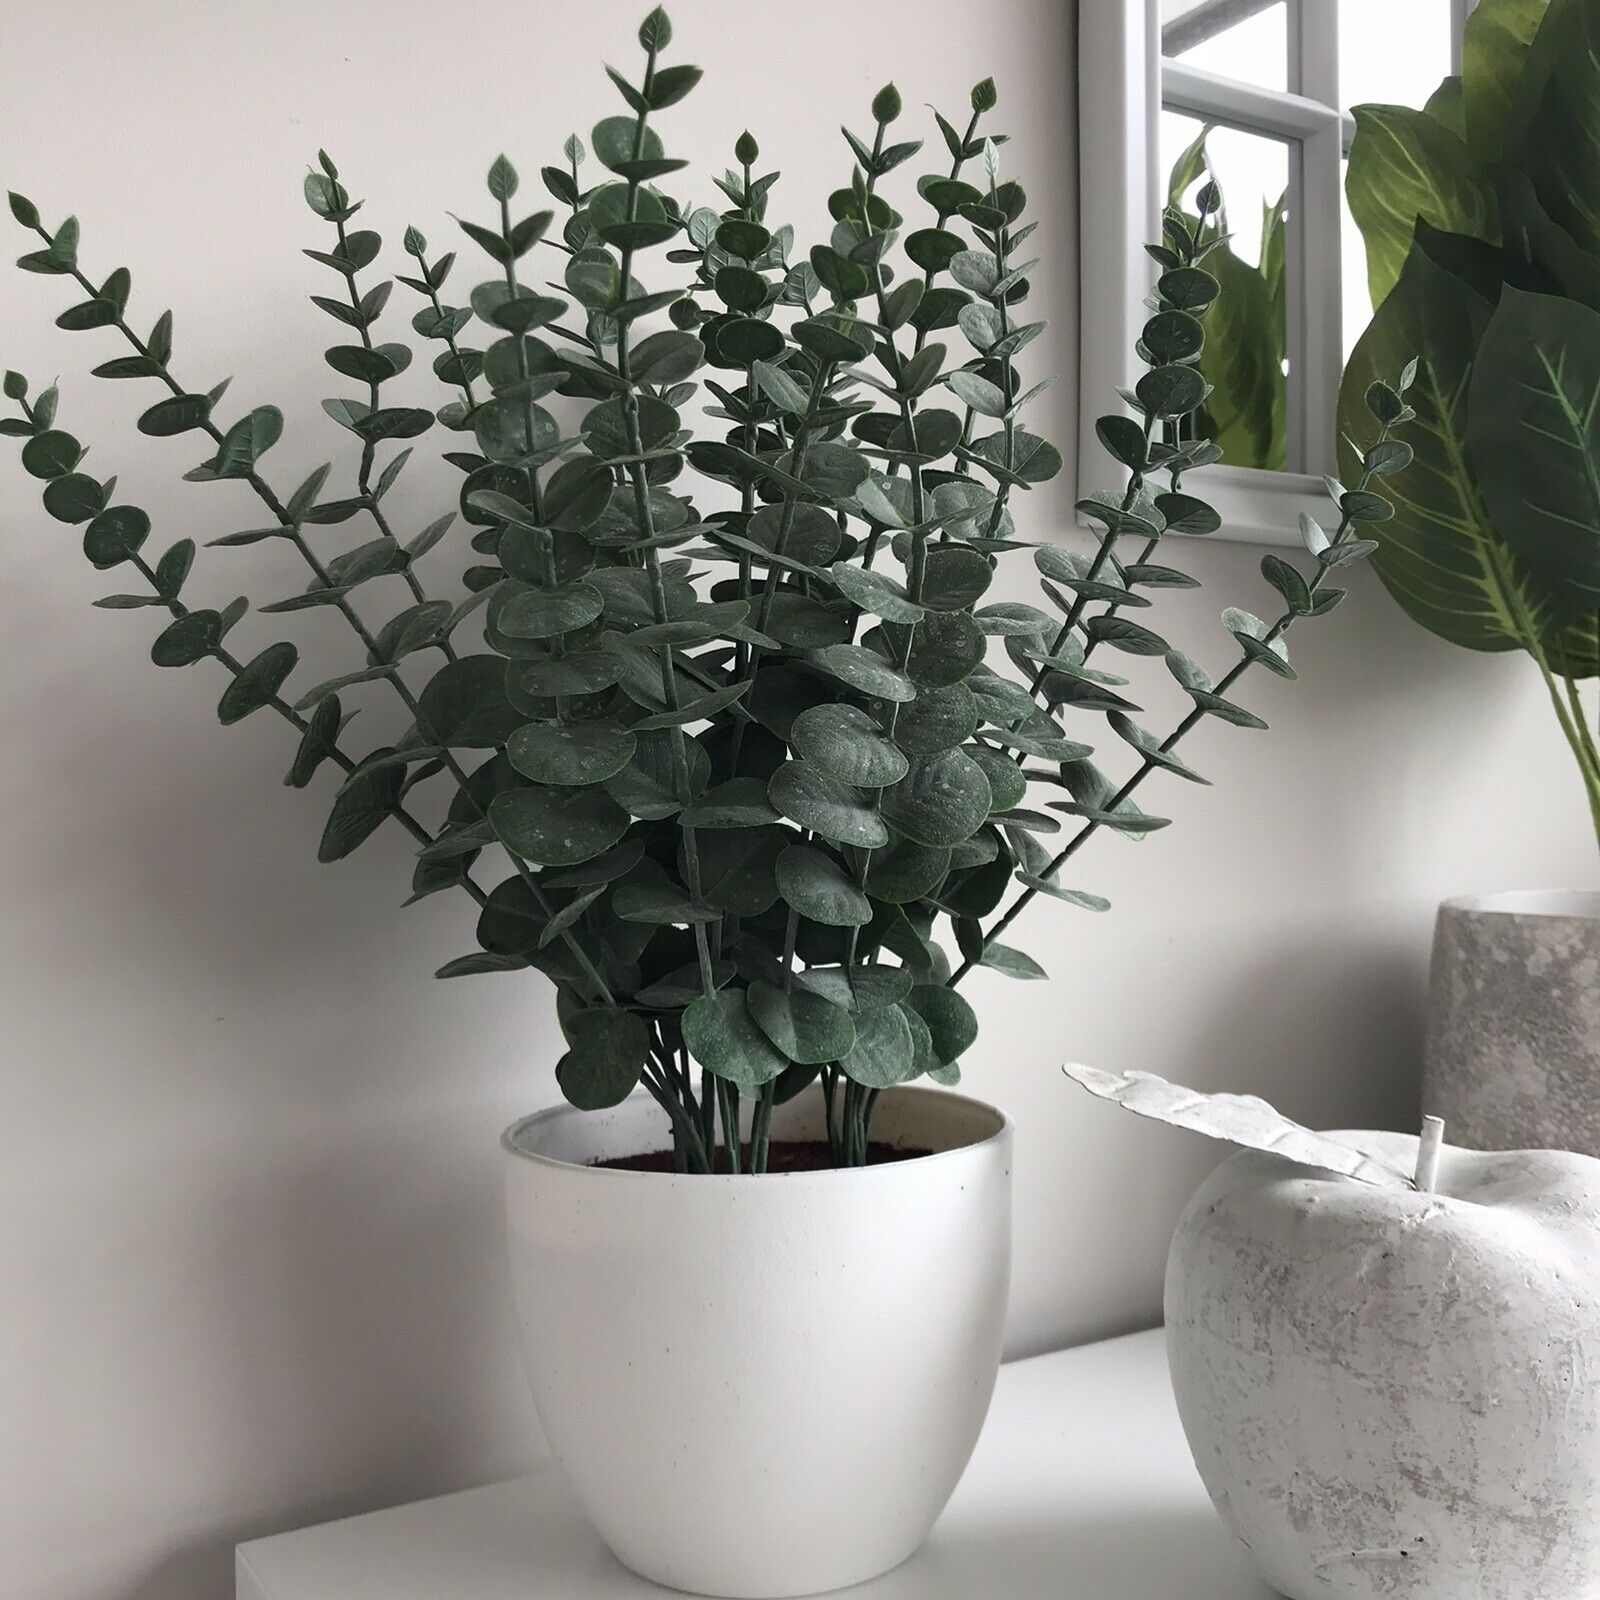 Eucalyptus Plant In White Pot Artificial Faux Greenery Home